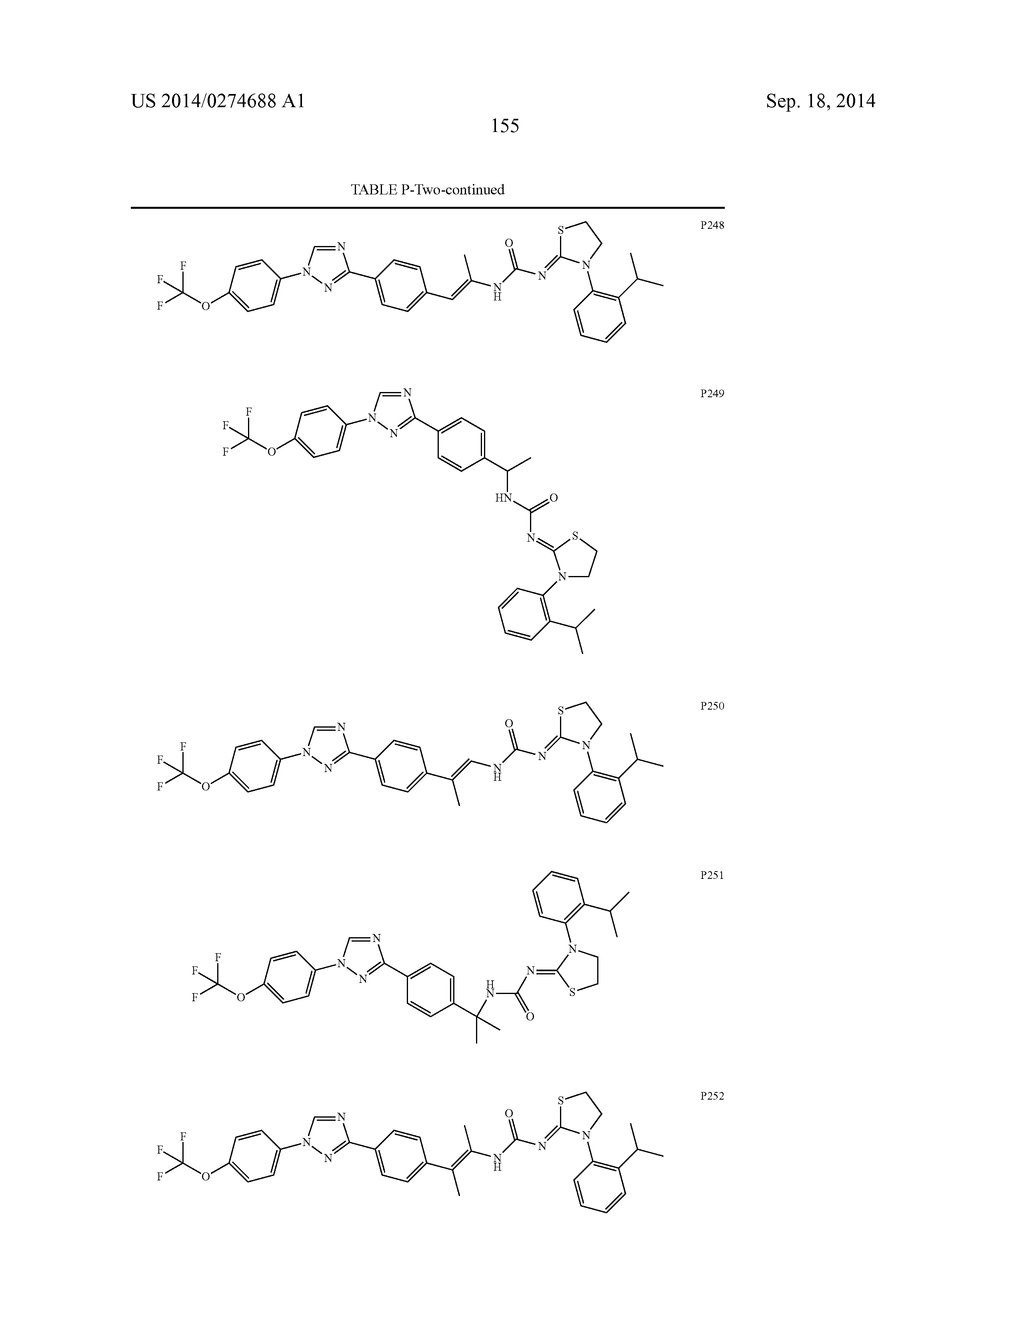 MOLECULES HAVING CERTAIN PESTICIDAL UTILITIES, AND INTERMEDIATES,     COMPOSITIONS, AND PROCESSES RELATED THERETO - diagram, schematic, and image 156